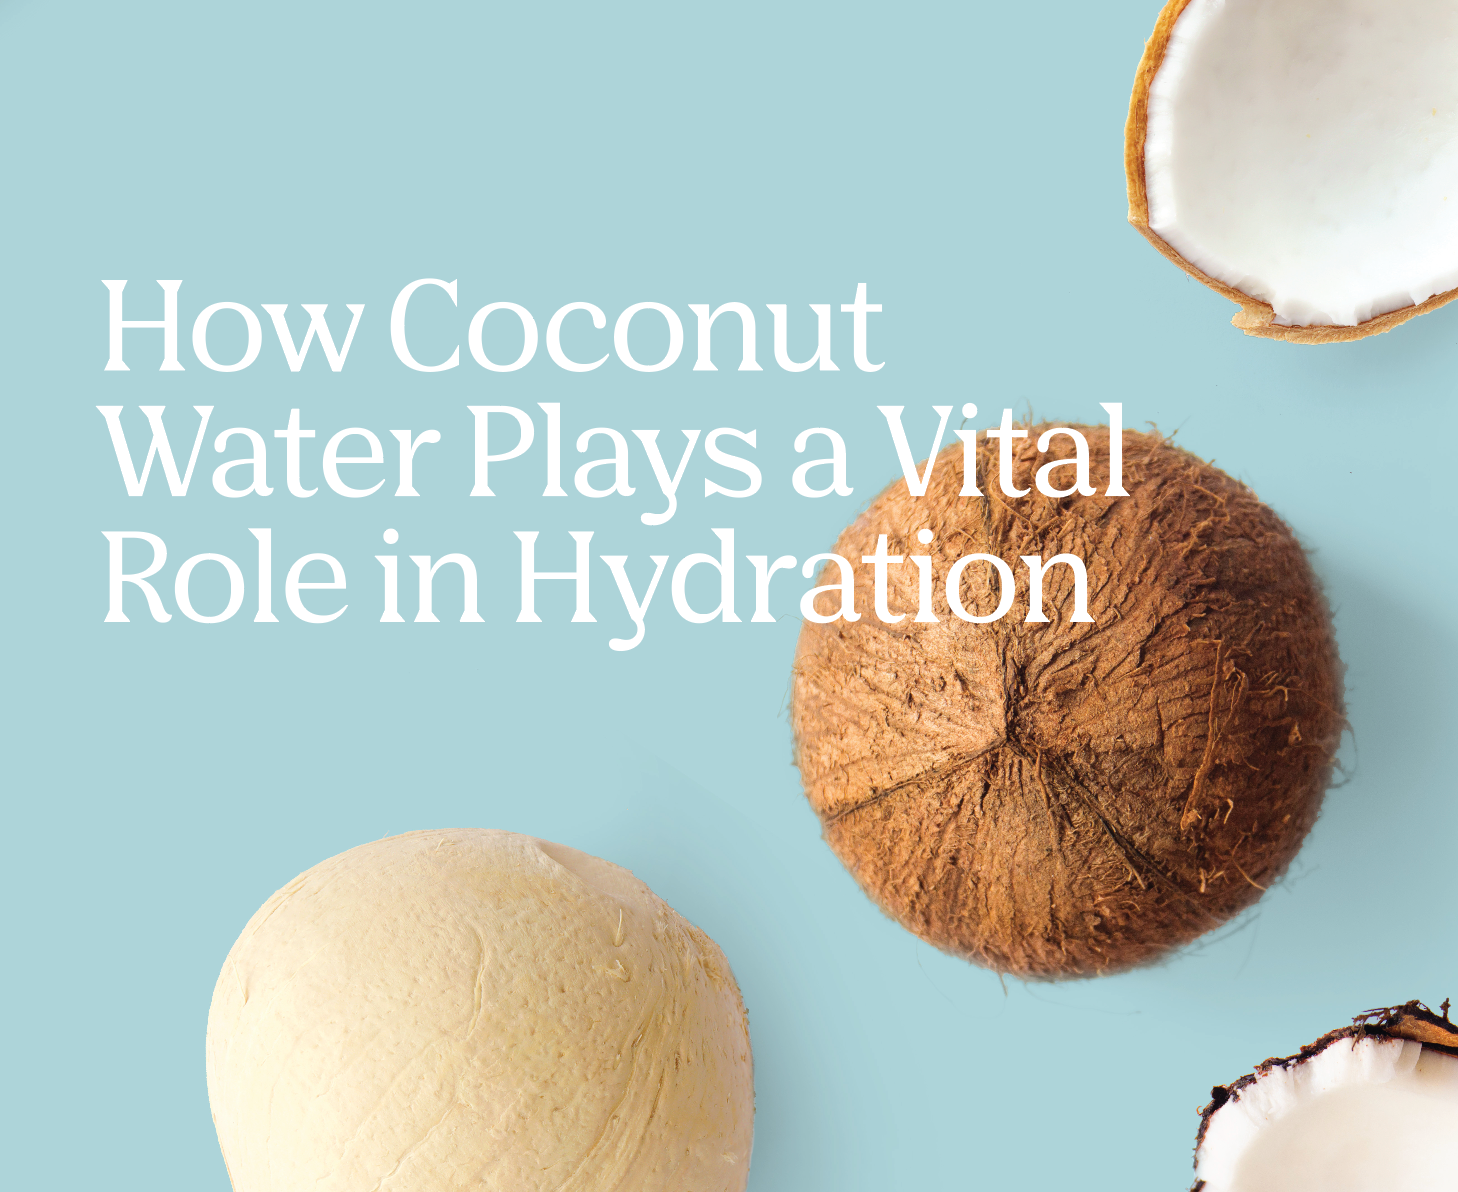 How Coconut Water Plays a Vital Role in Hydration